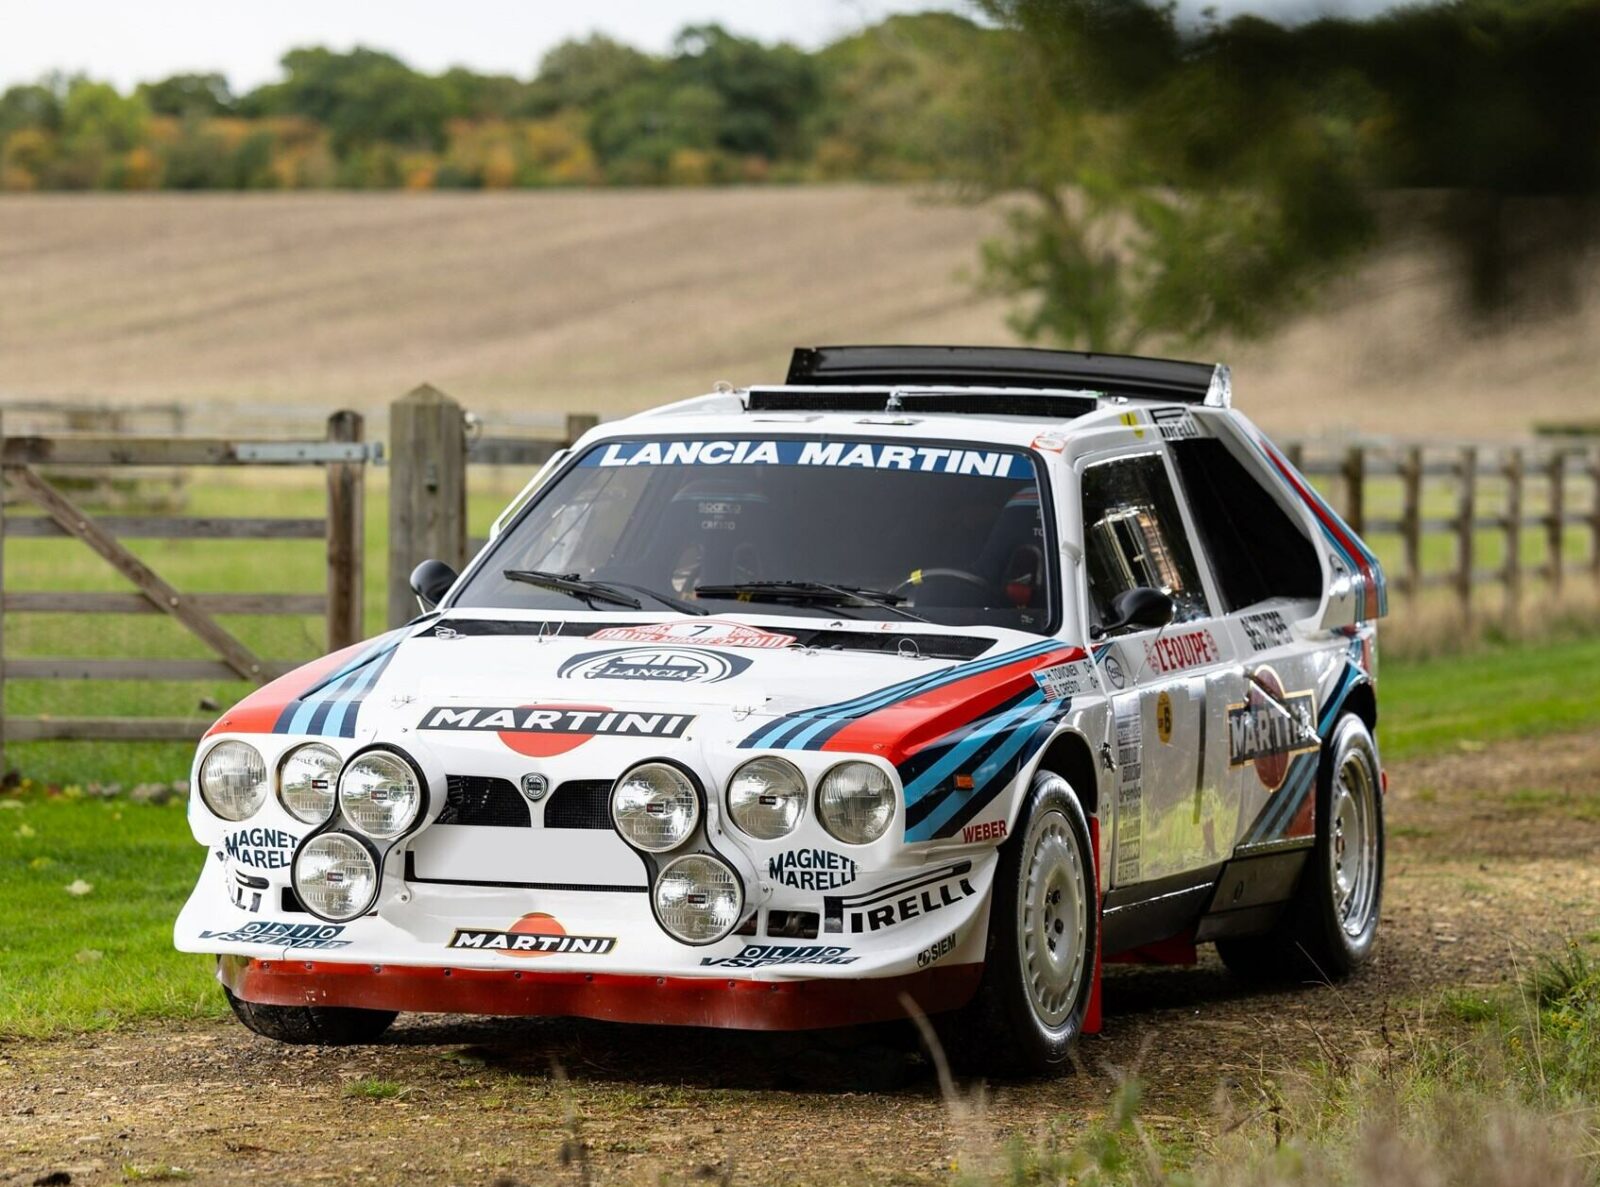 Lancia Delta S4 Group B Works – The Car That Won The 1986 Monte Carlo Rally